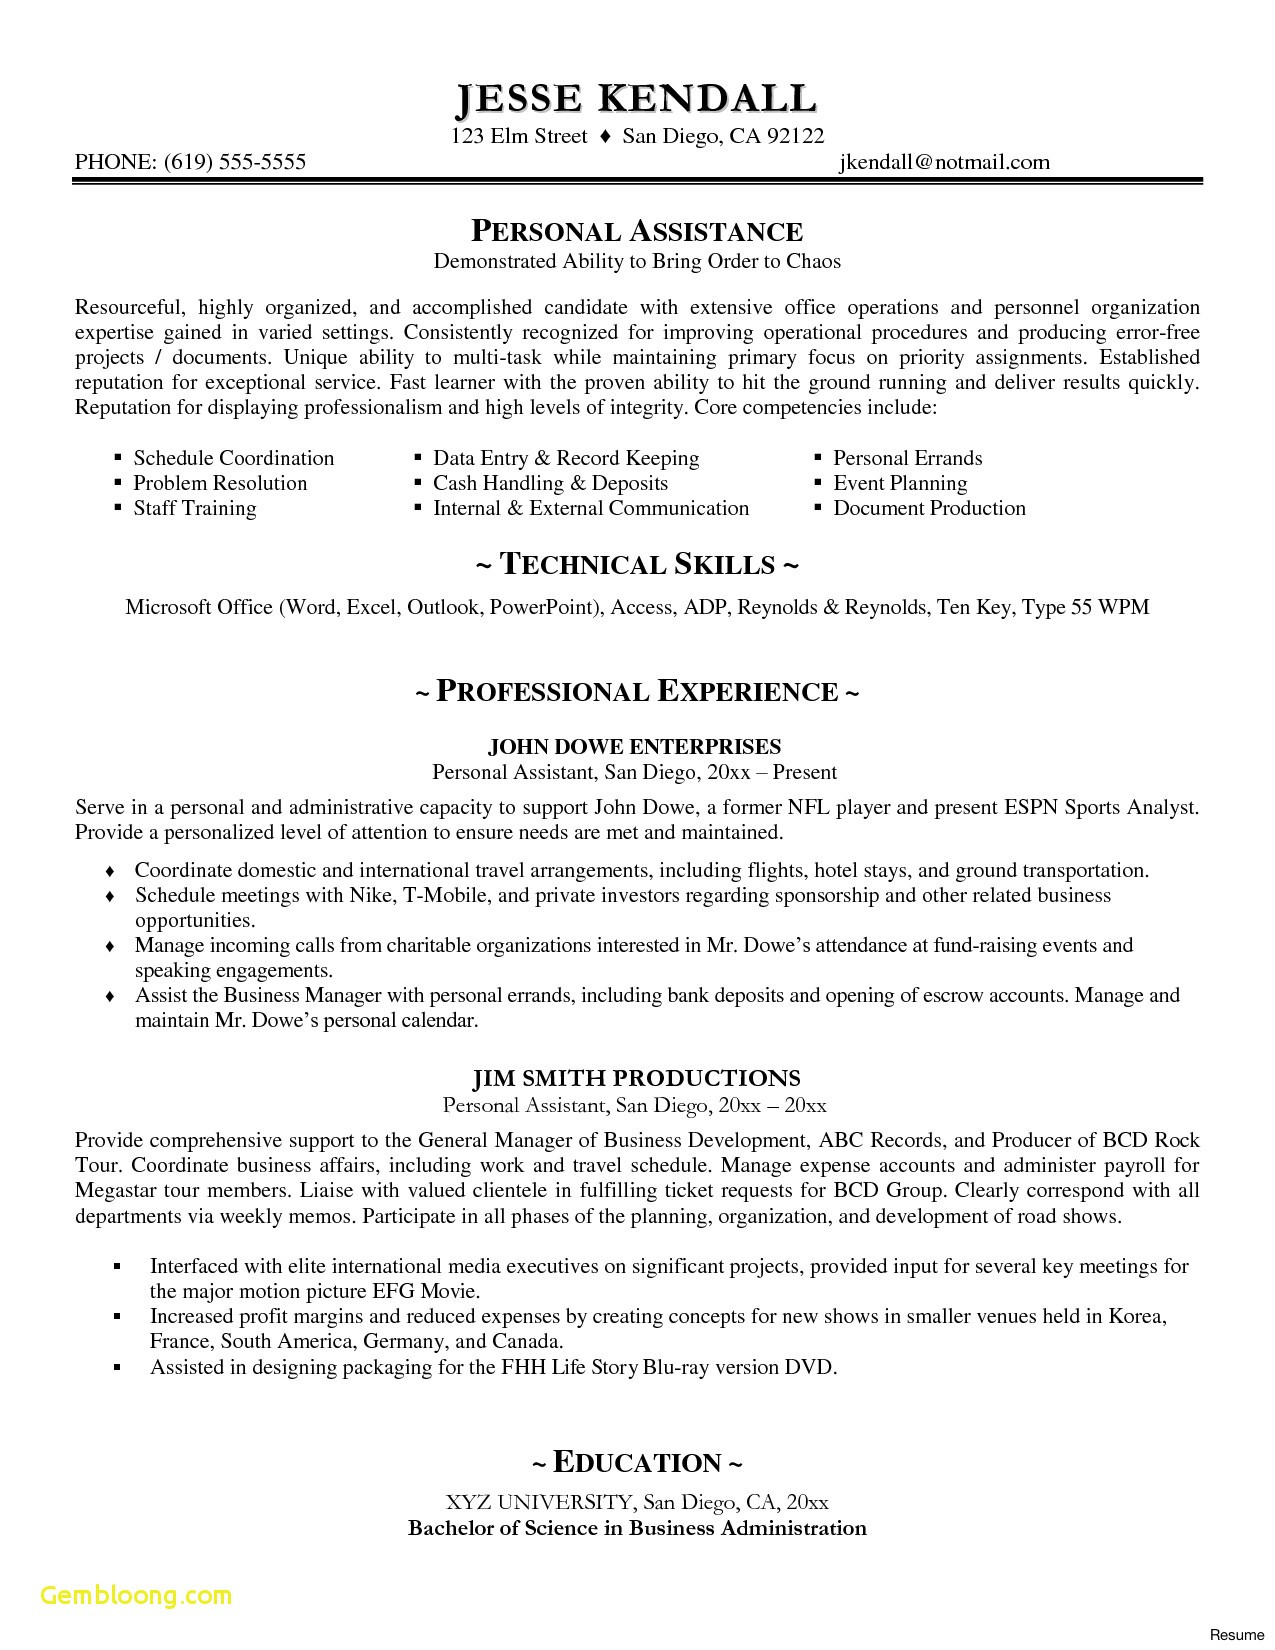 Executive Cover Letter Template Word - Resume Cover Letter Sample Word format Fresh Resume Samples Doc New